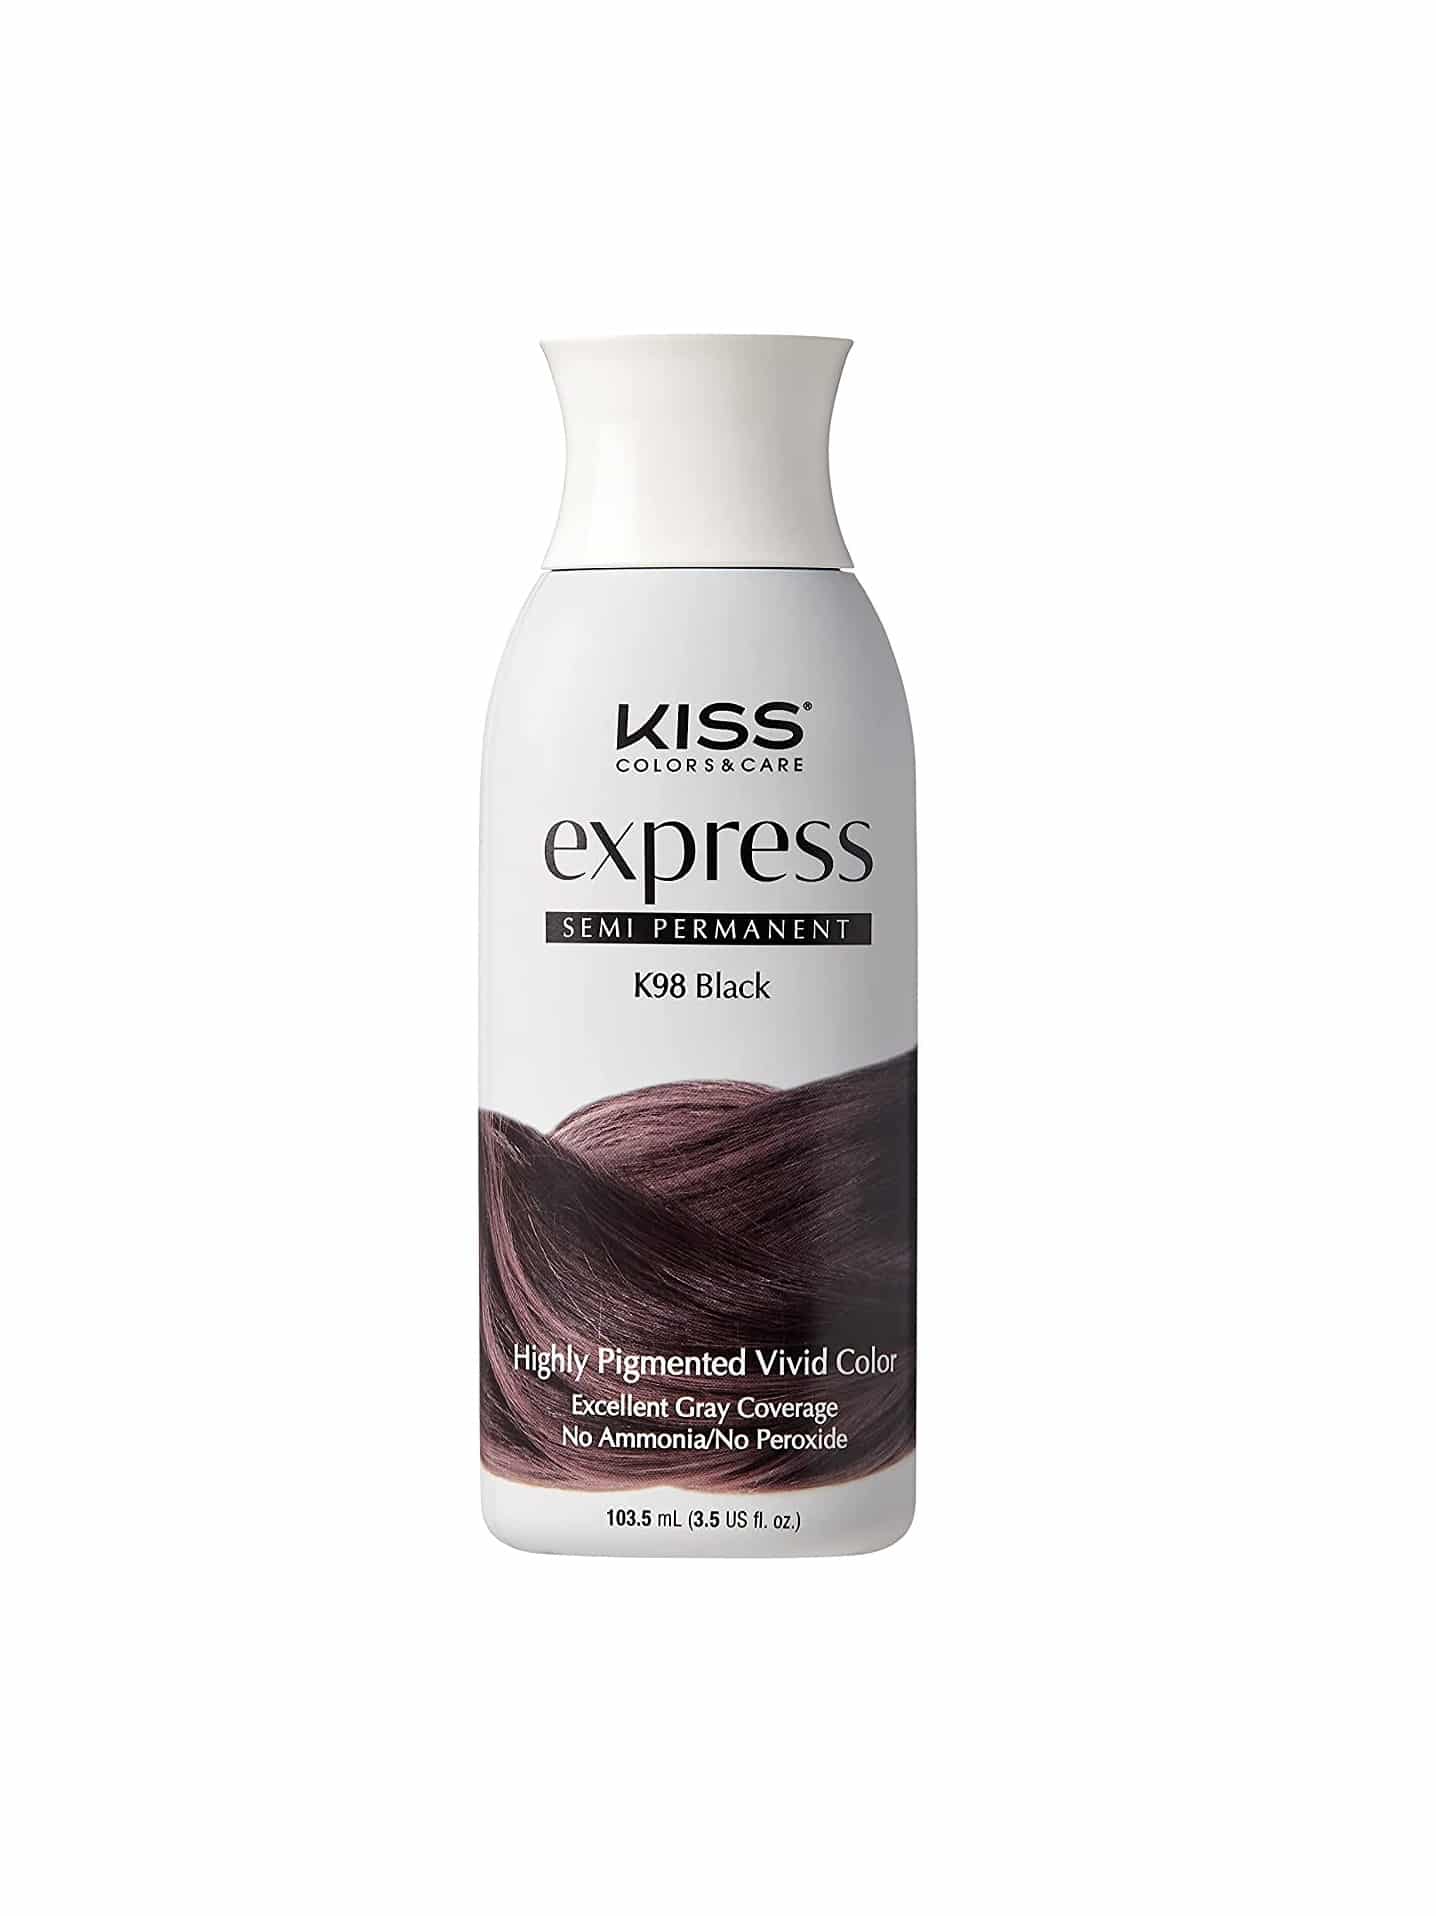 How to use Kiss Express Airbrush tutorial 